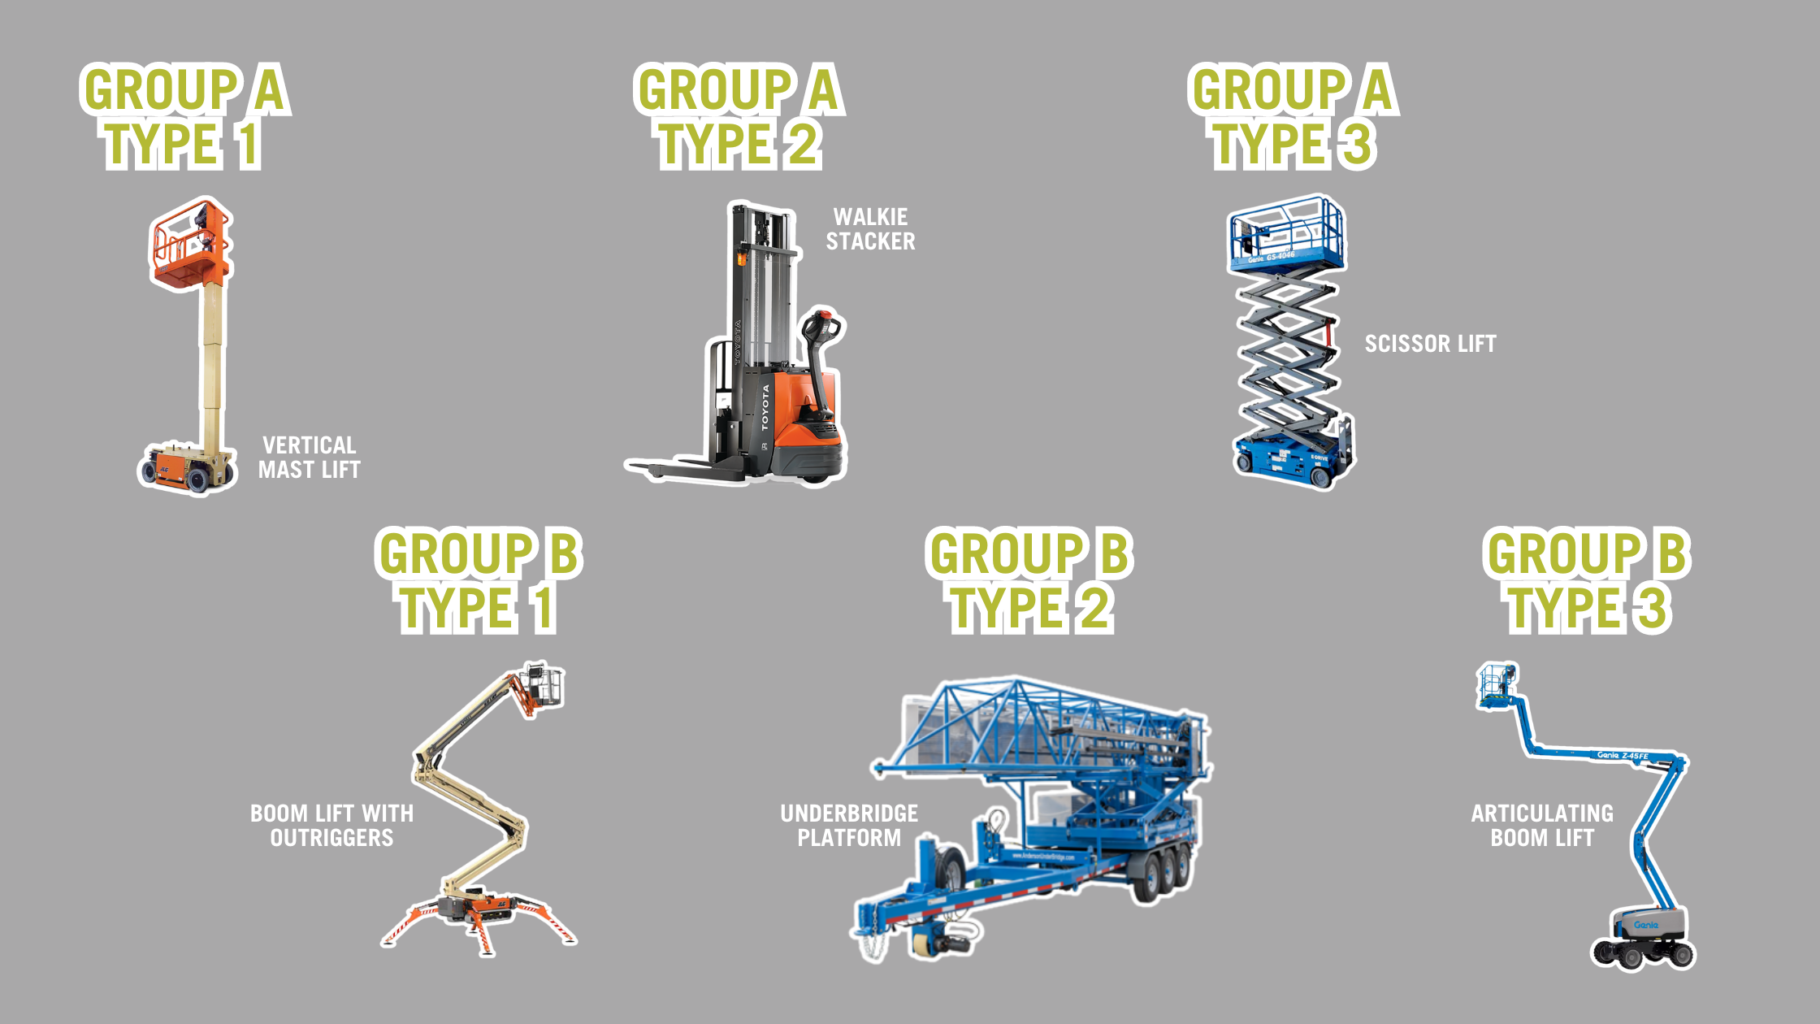 group a type 1: vertical mast lift. group a type 2: walkie stacker with platform. group a type 3: scissor lift. group b type 1: boom lift with outriggers. group b type 2: underbridge platform. group b type 3: articulating boom lift. 